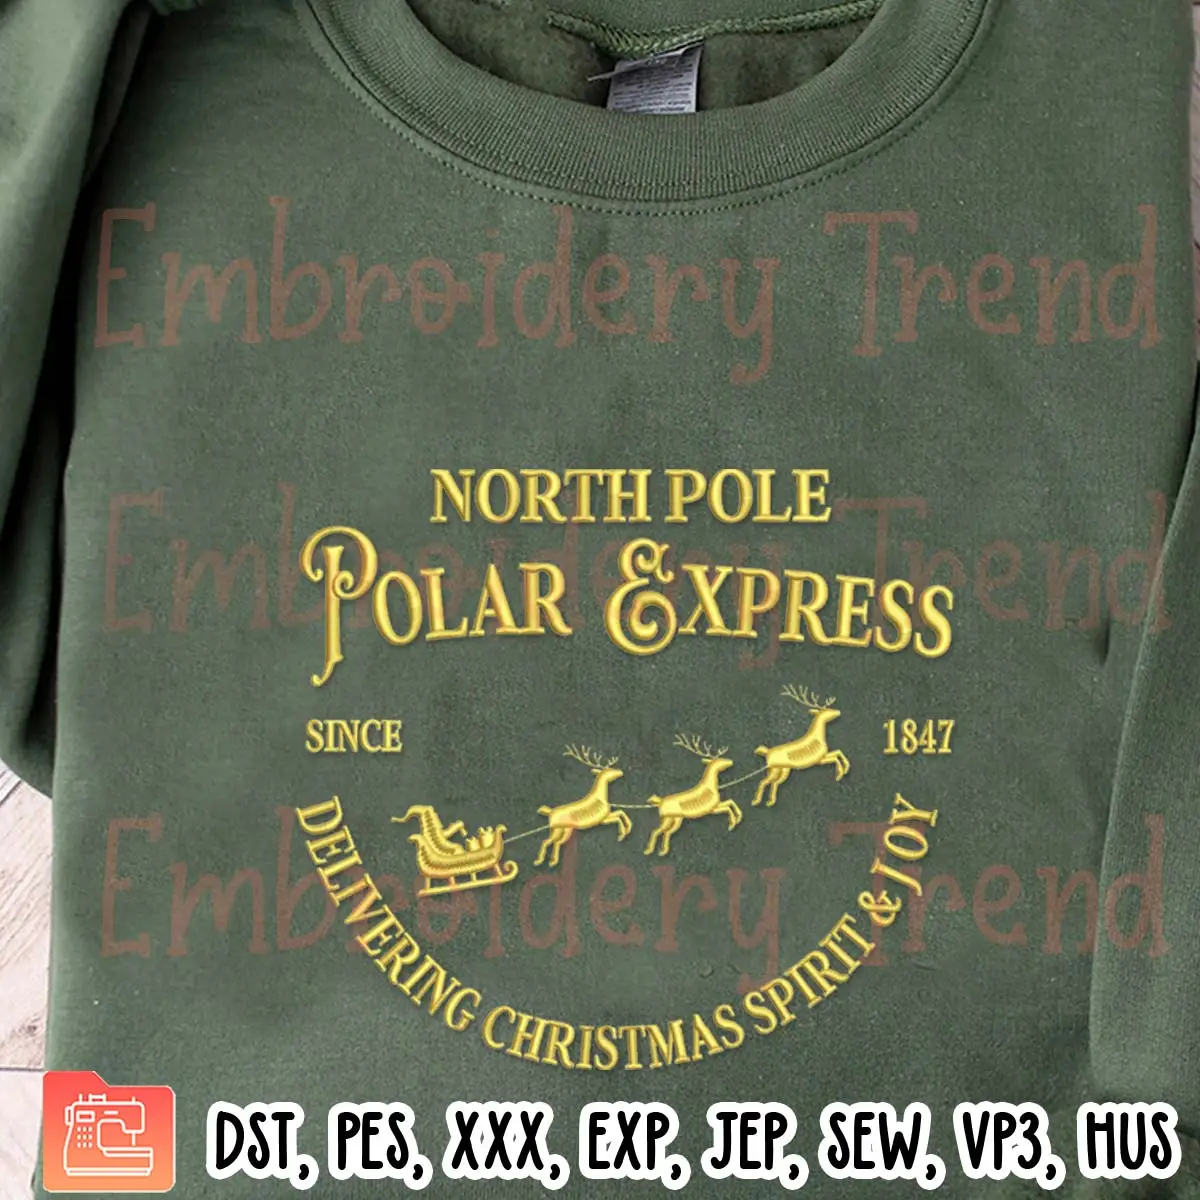 North Pole Polar Express Since 1847 Embroidery Design, Christmas Embroidery Digitizing File